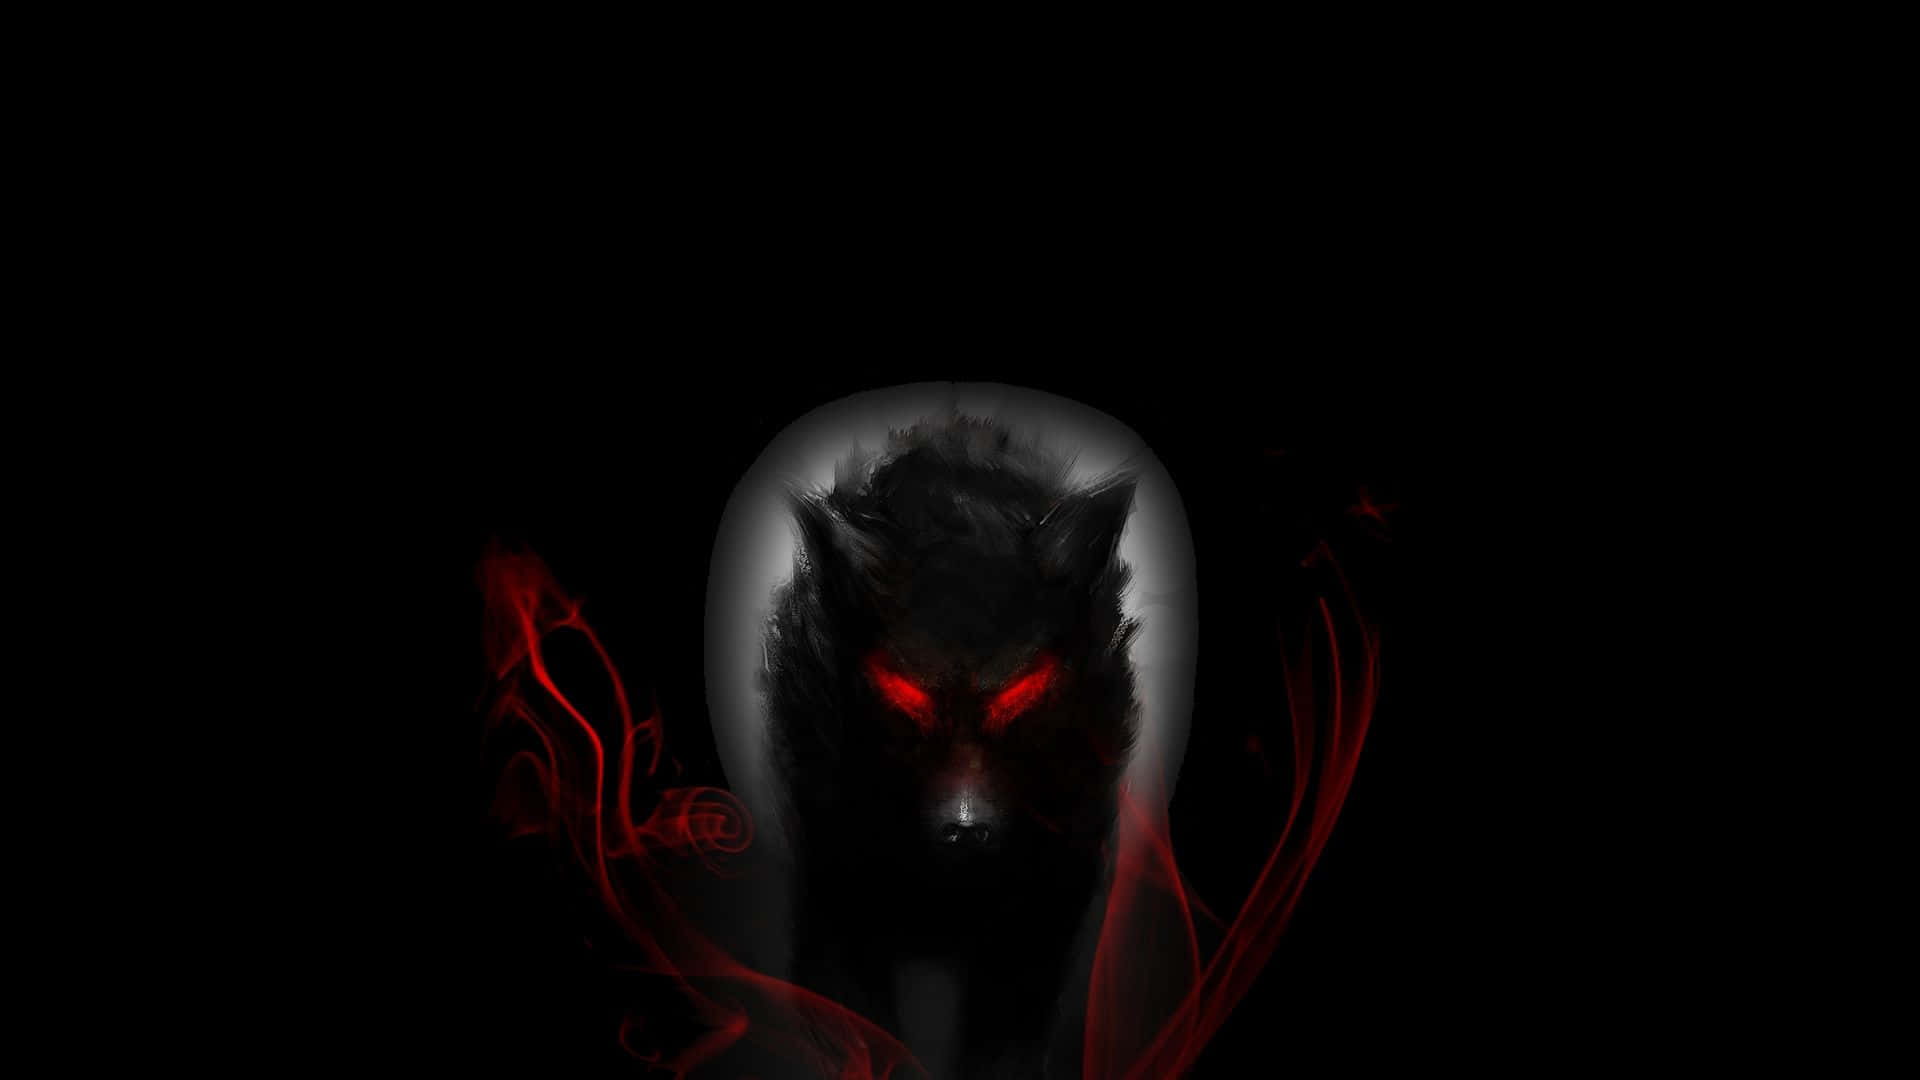 The Majesty of the Black Wolf